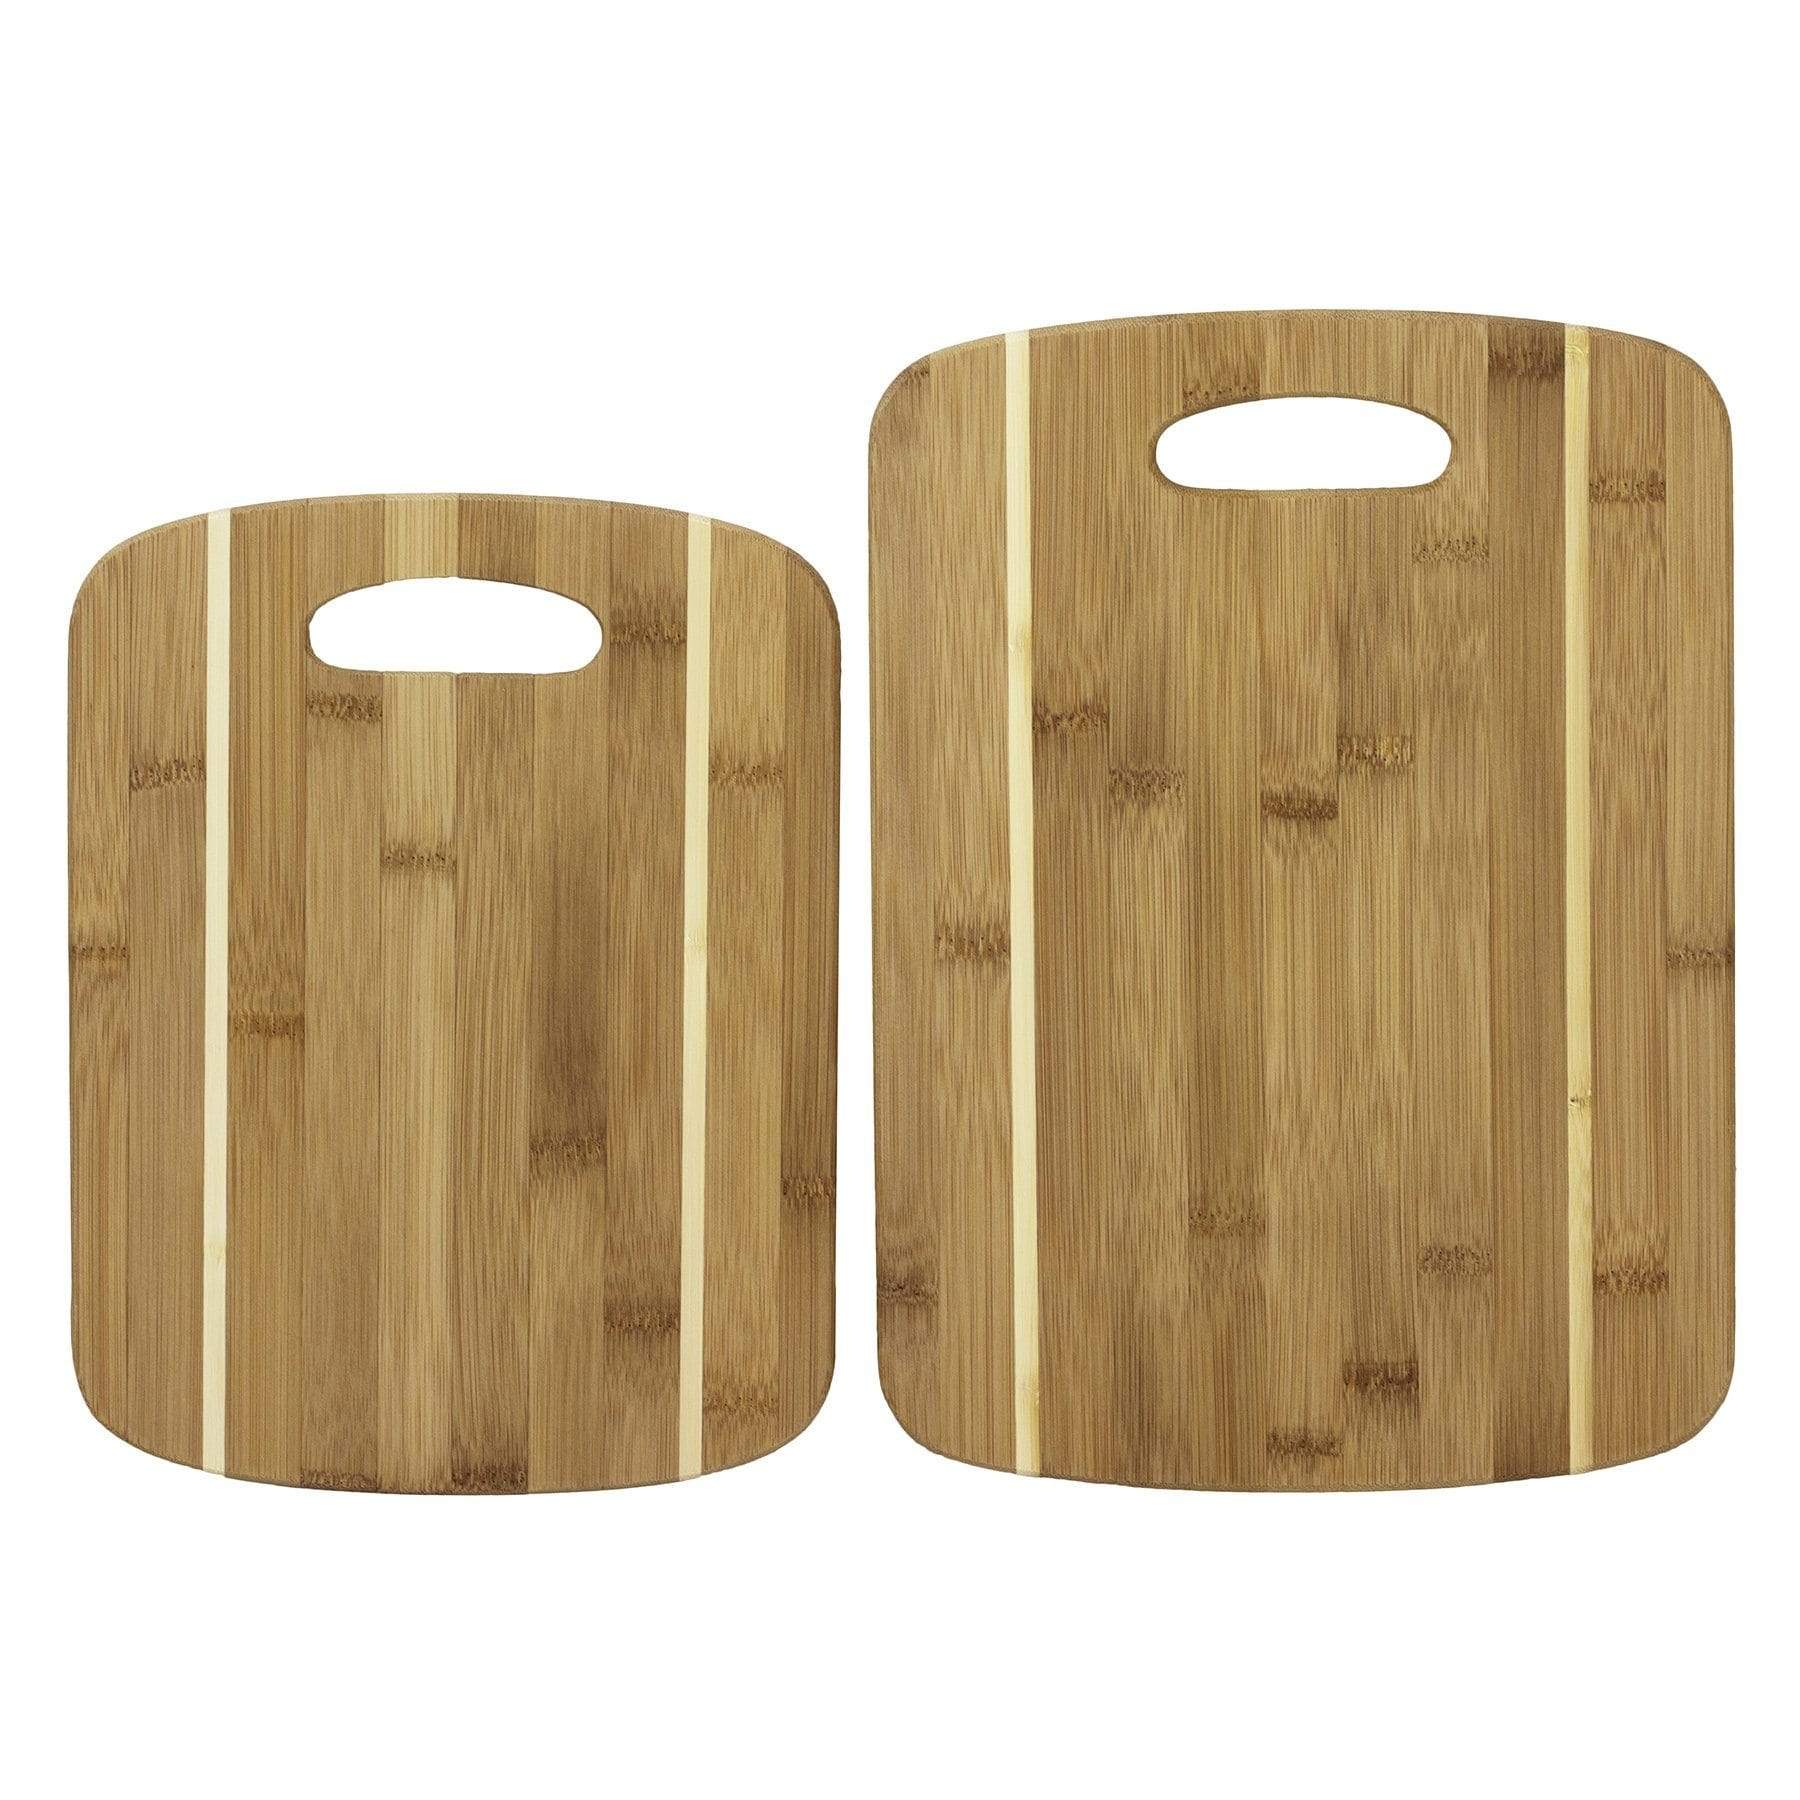 2pc Bamboo and Poly Cutting Board Set - Made By Design 2 ct